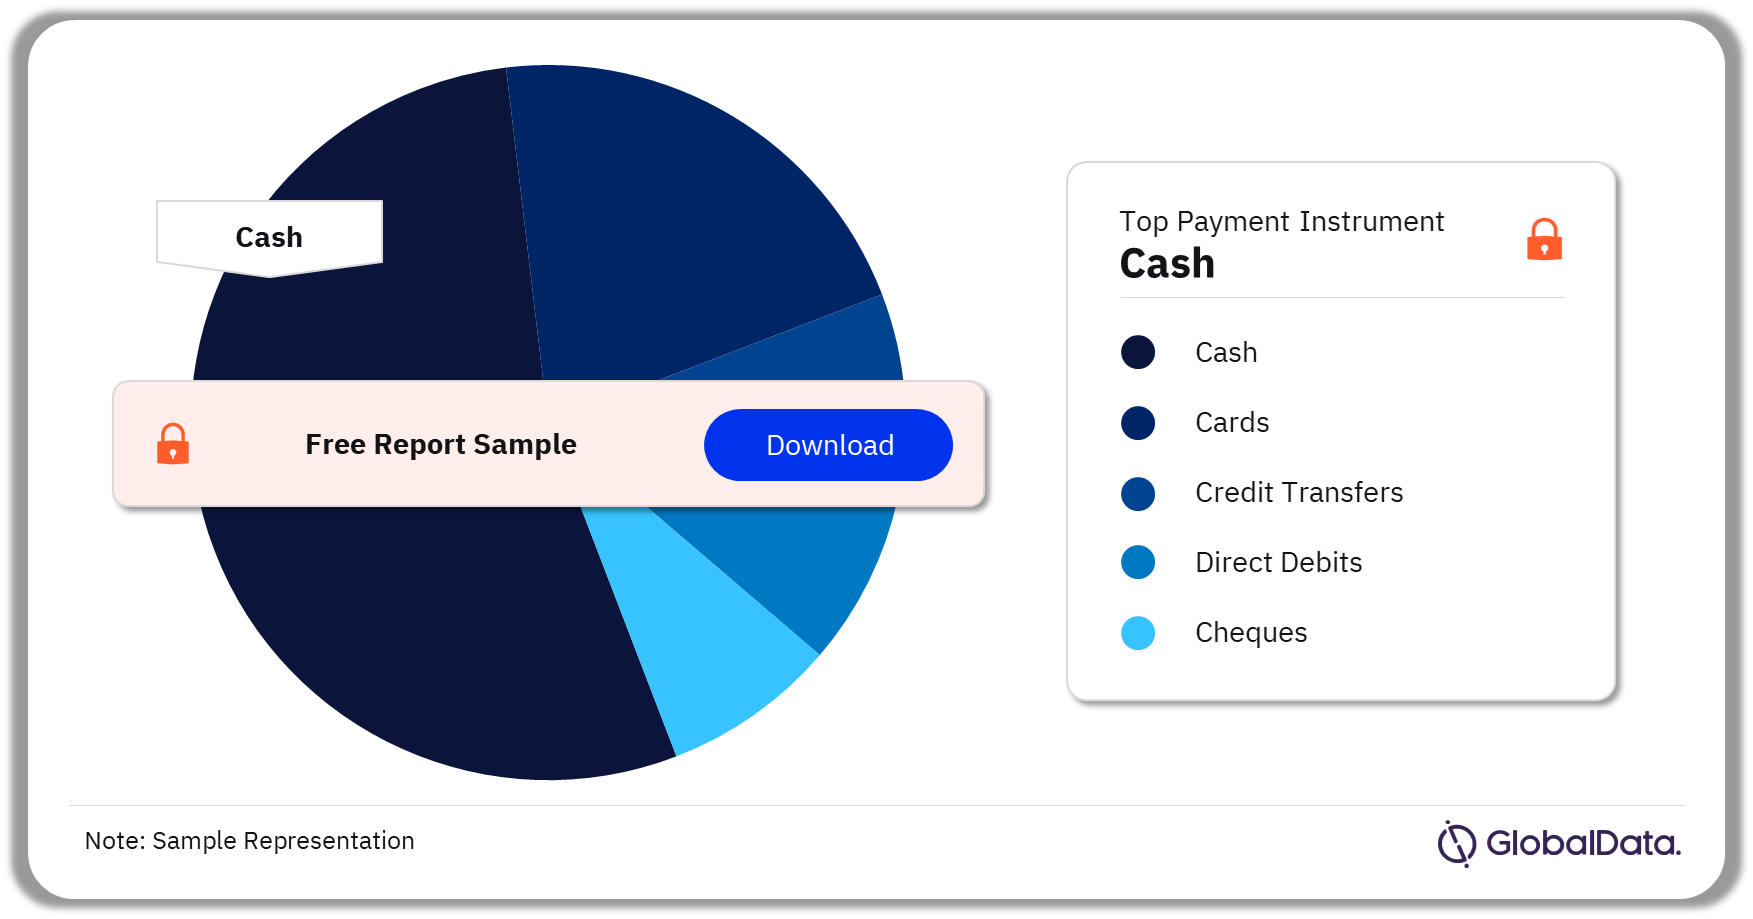 Peru Cards and Payments Market Analysis by Payment Instruments, 2023 (%)